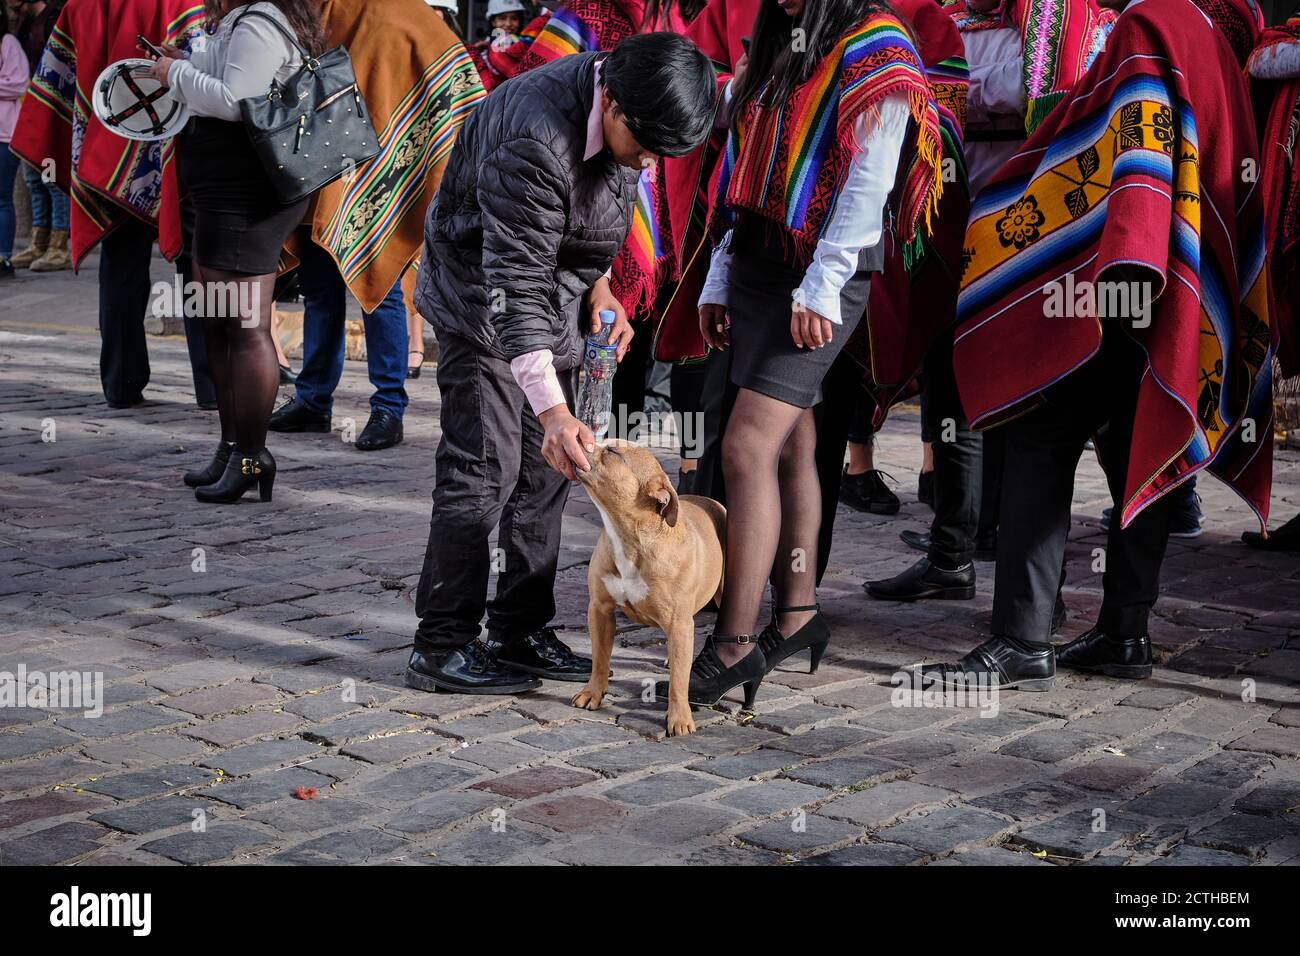 An adult male man stoops to pet a dog during the Inti Raymi'rata sun festival over the winter solstice, Cusco, Peru Stock Photo